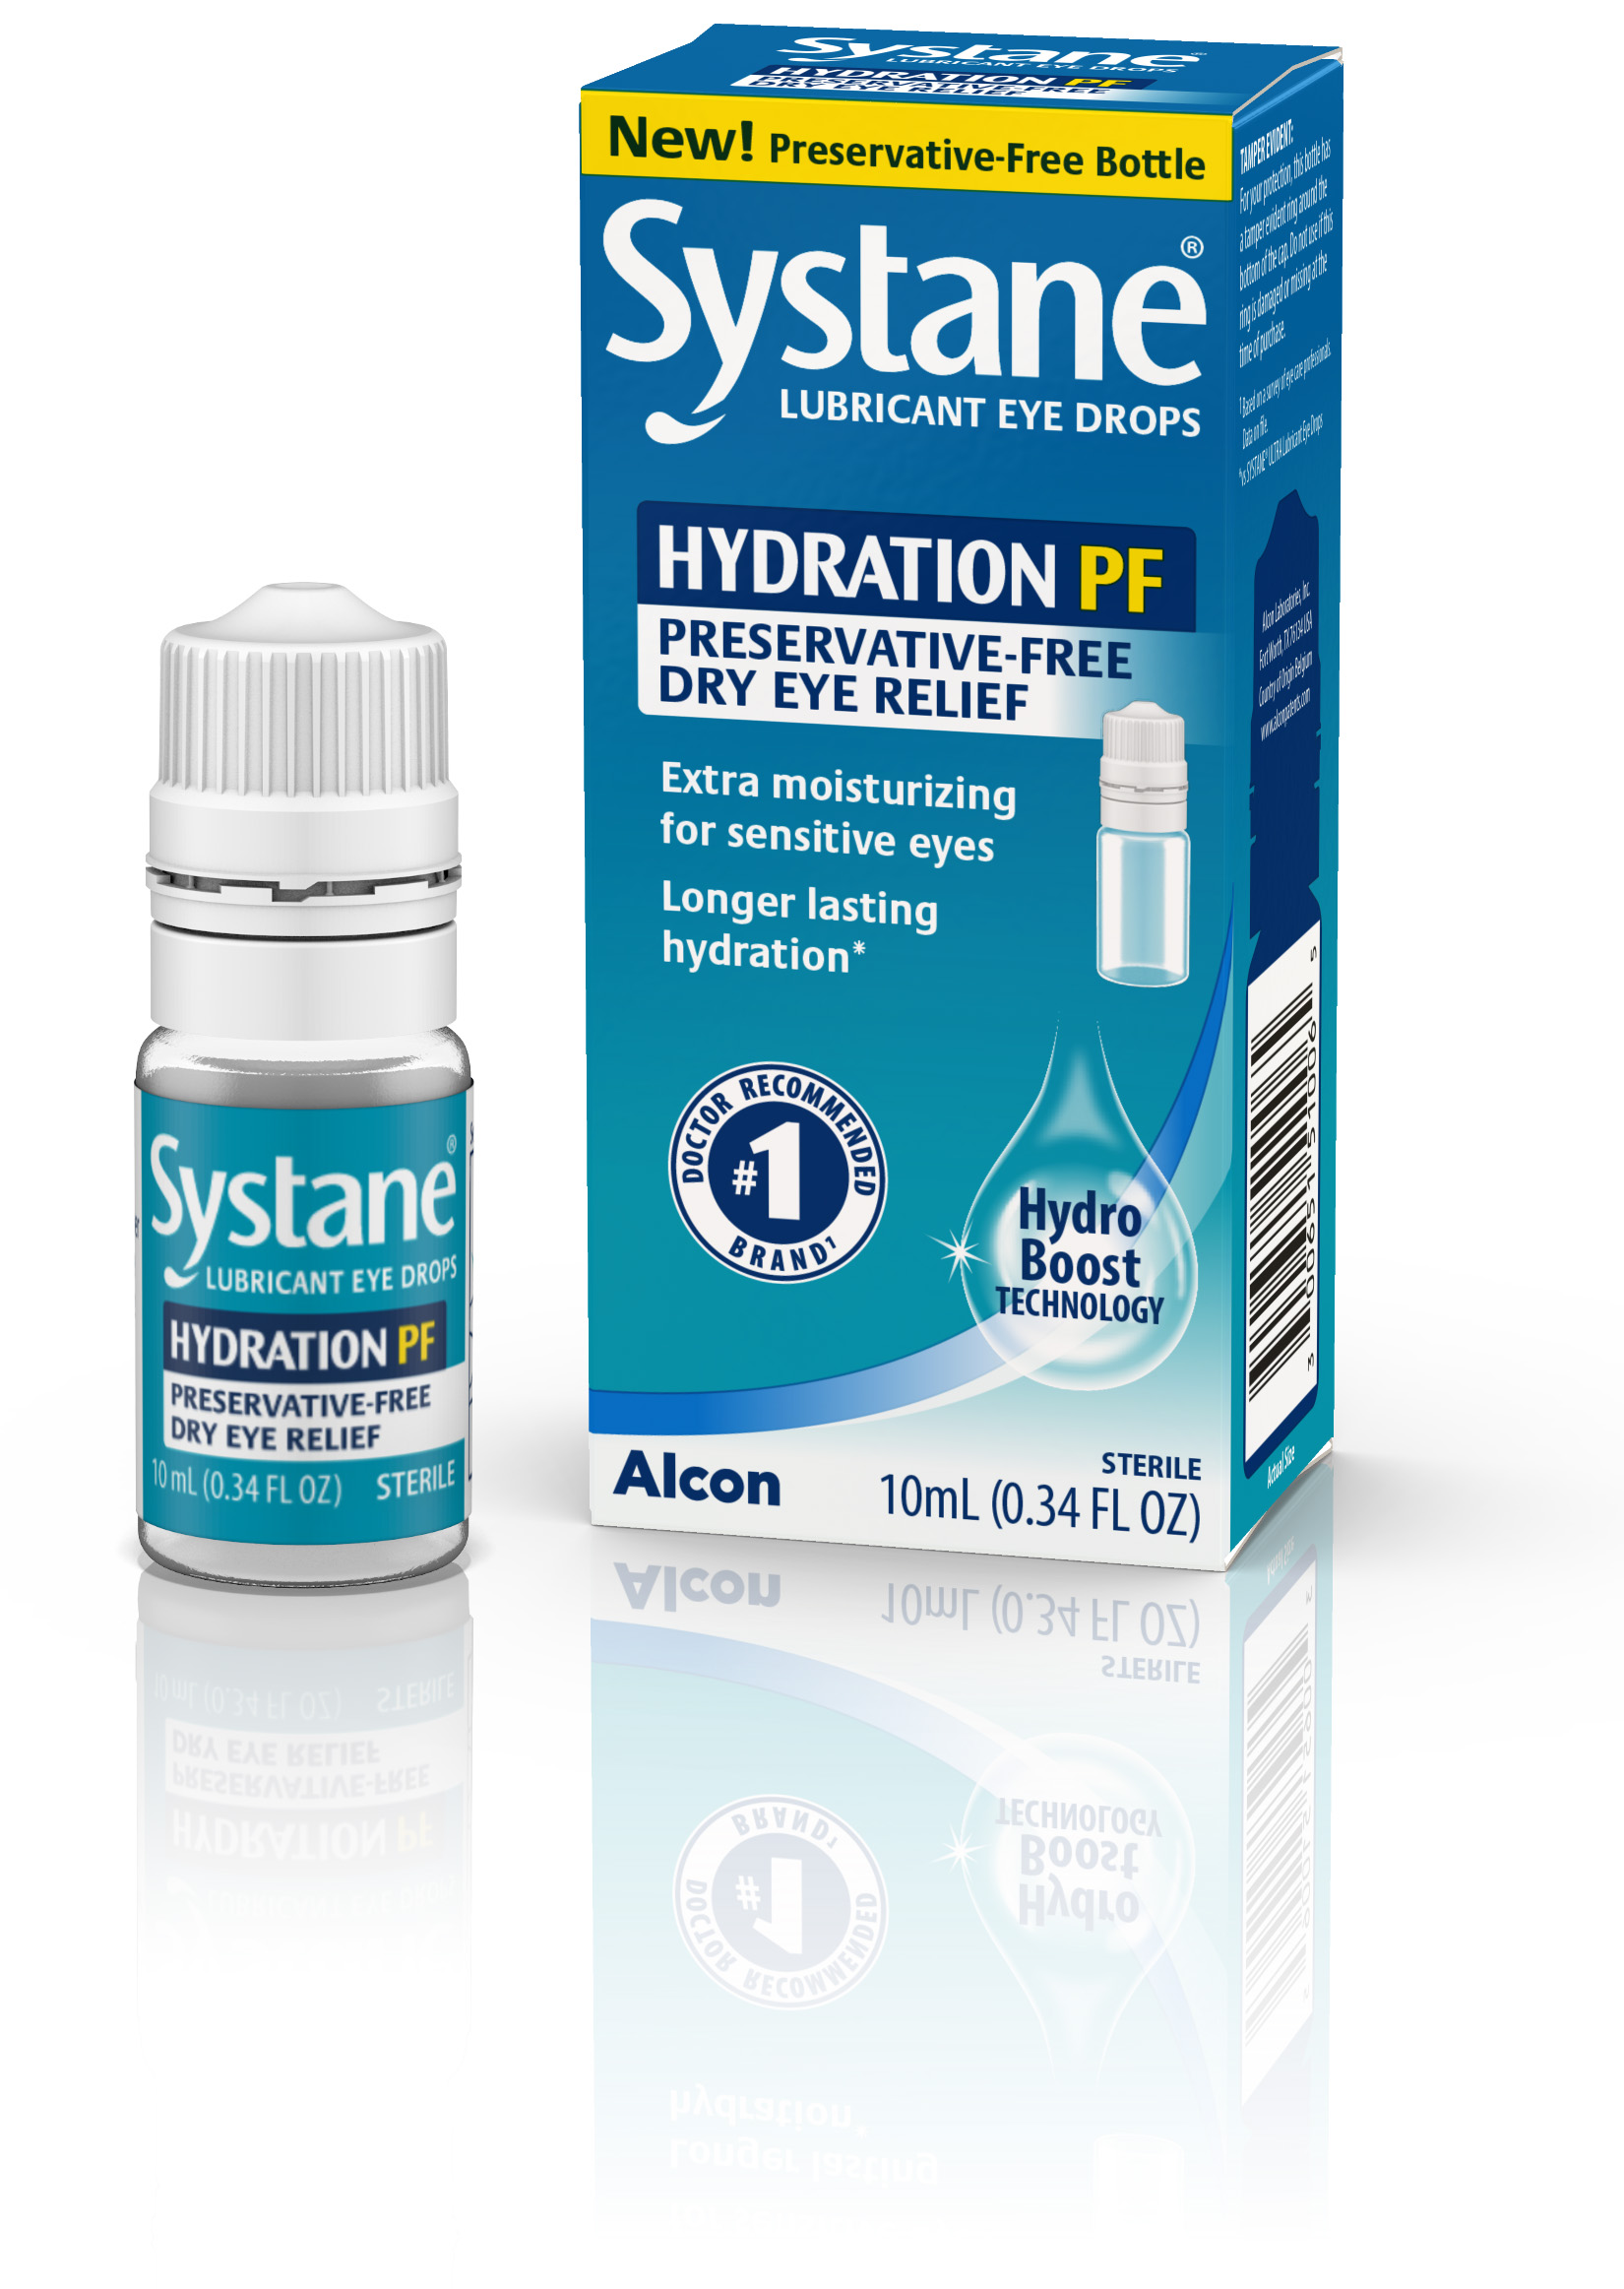 Systane packaging